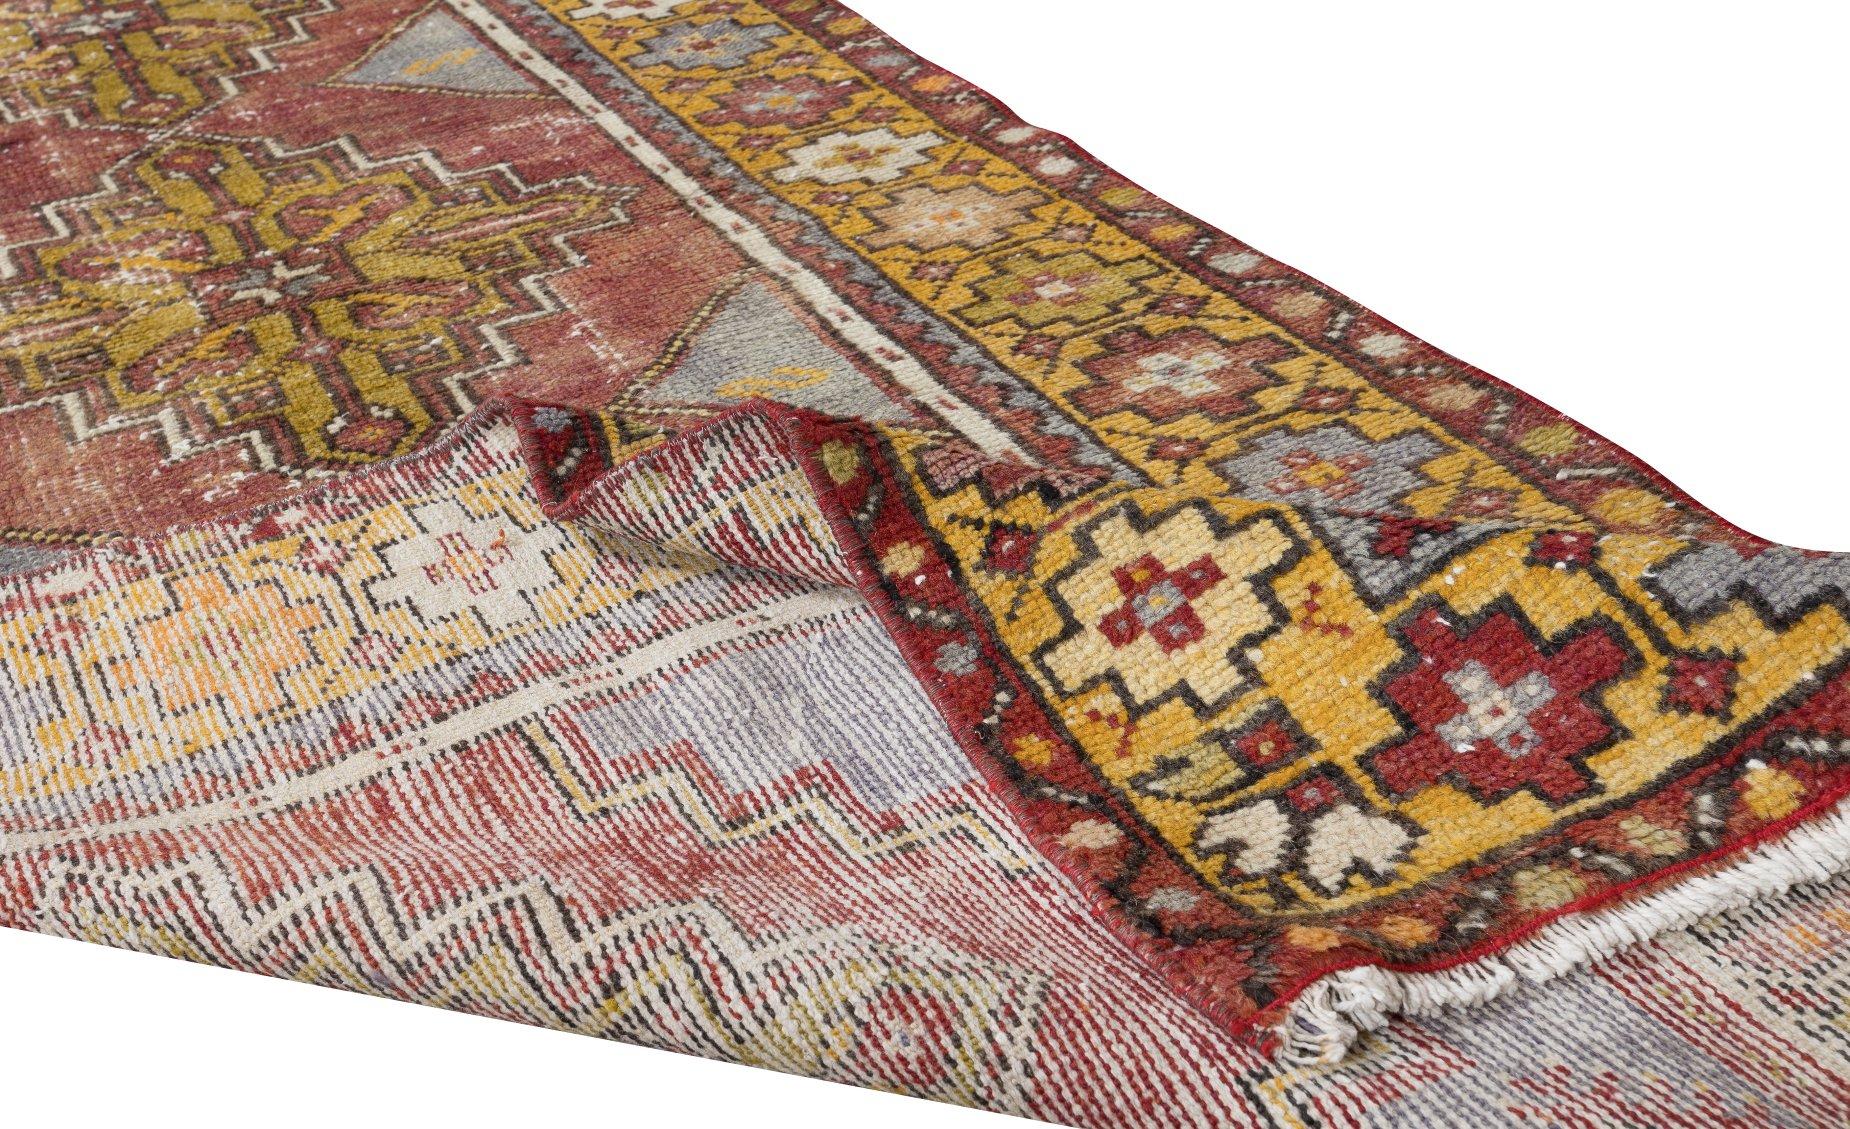 Tribal 3x8.7 Ft Vintage Village Runner Rug from Turkey, Hand-Knotted Corridor Carpet For Sale